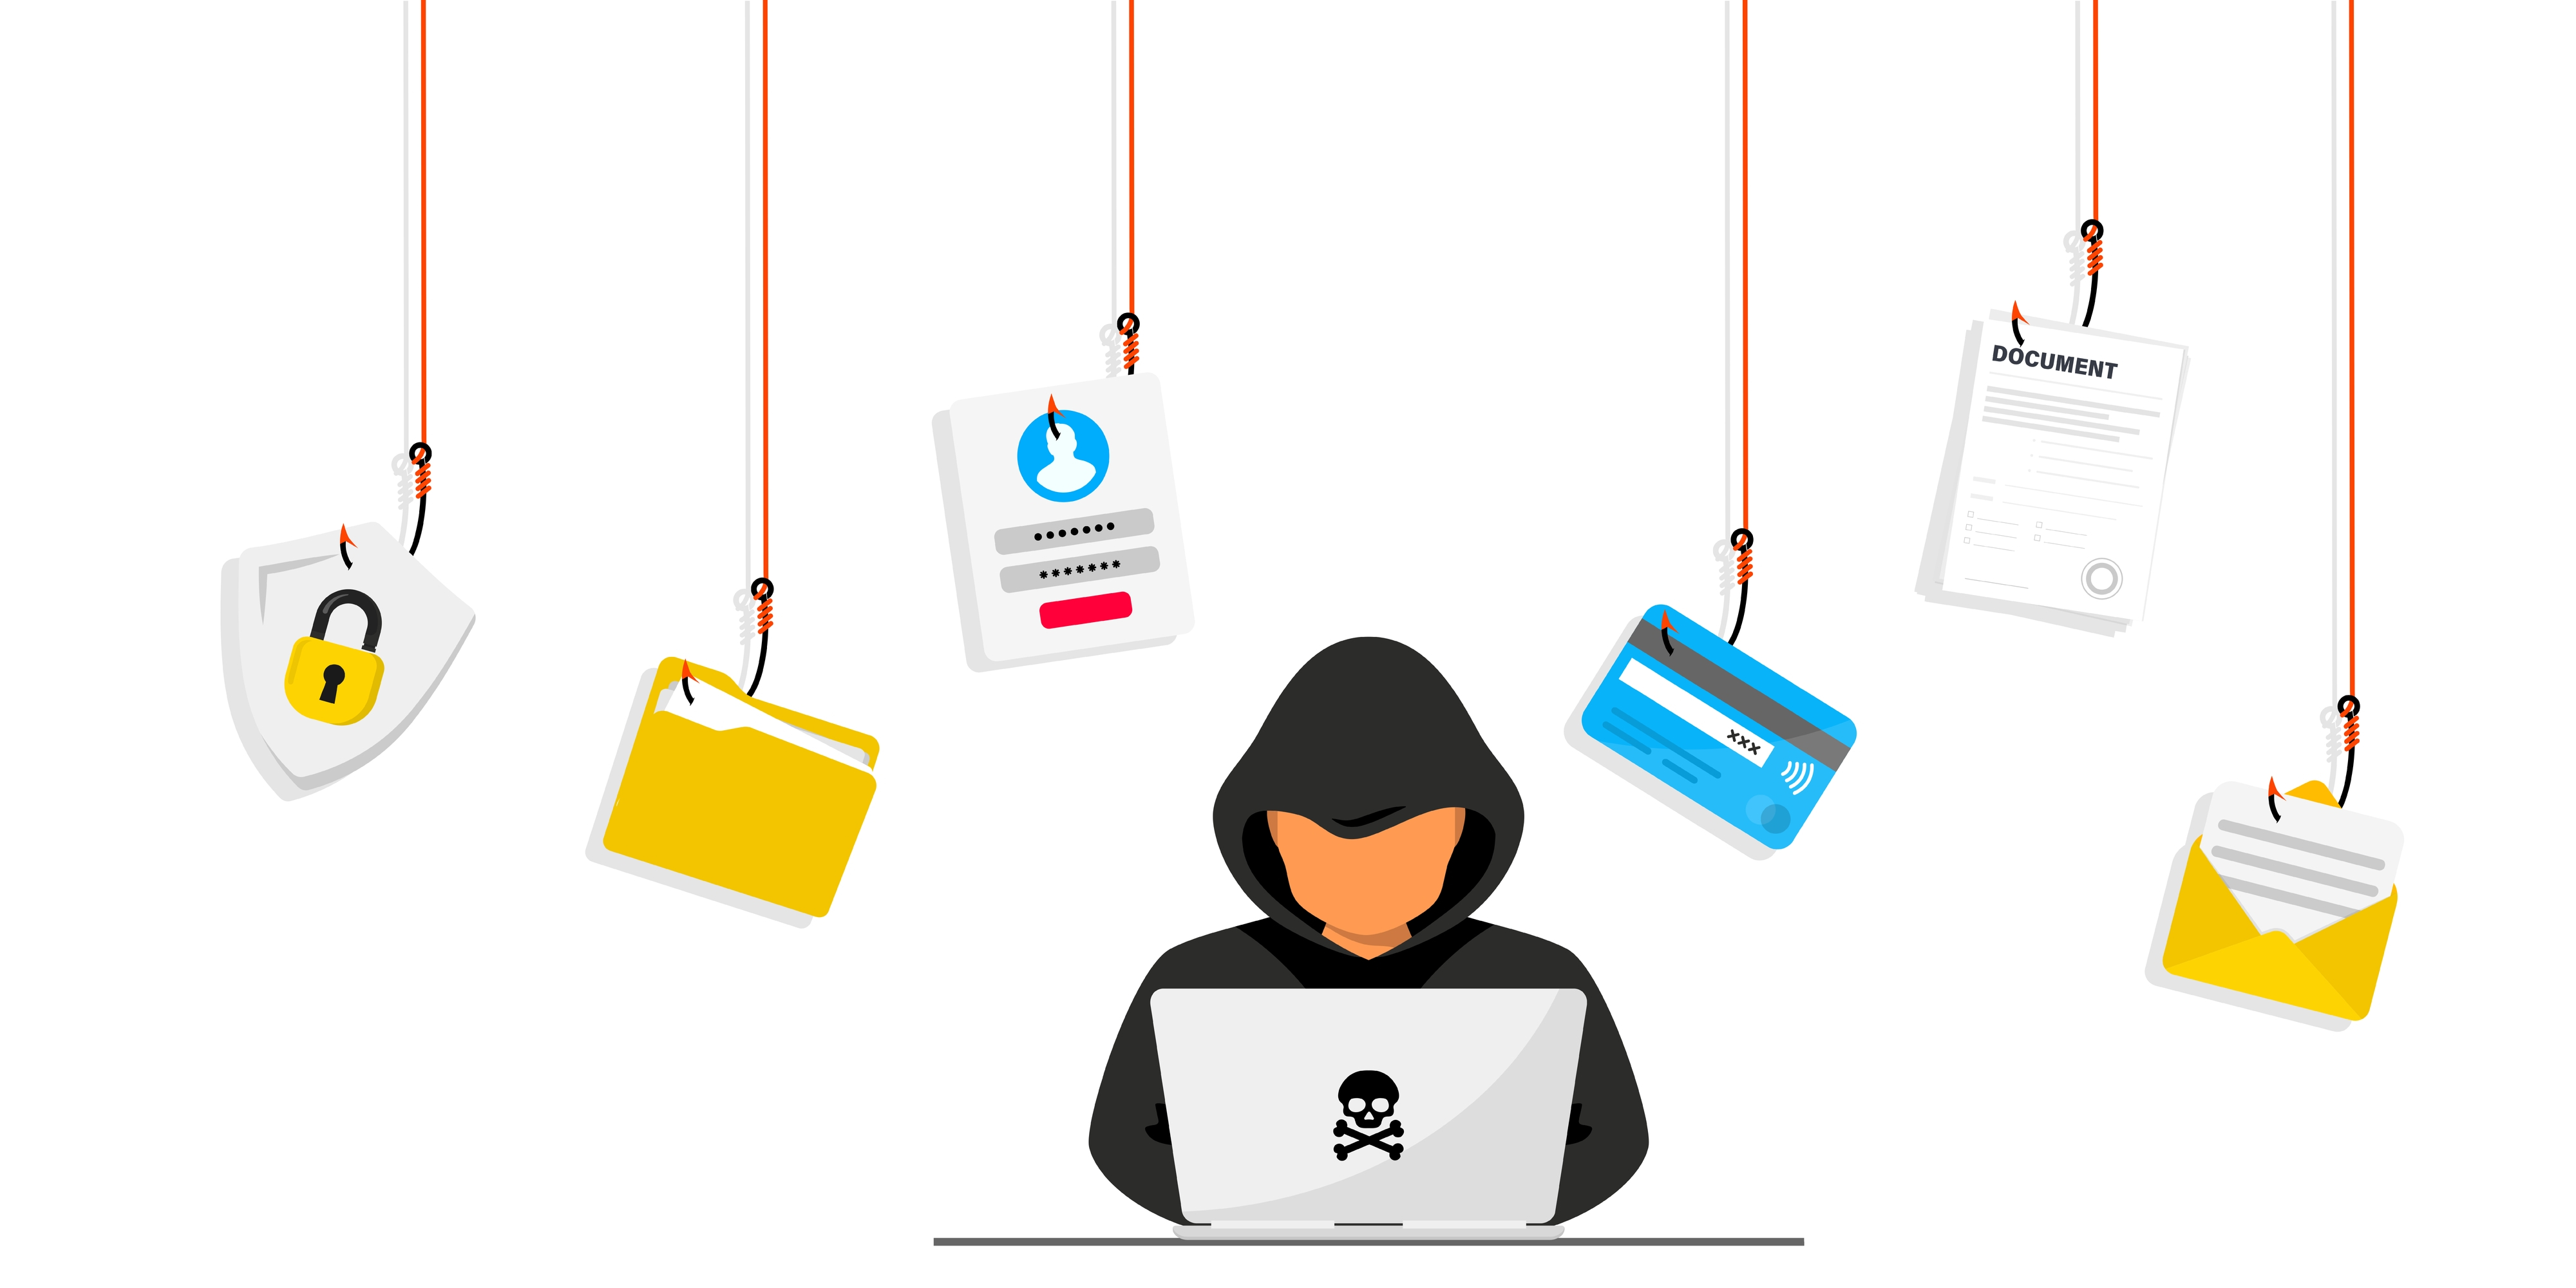 Three-Quarters of Organizations Have Experienced Phishing Attack in the Last 12 Months